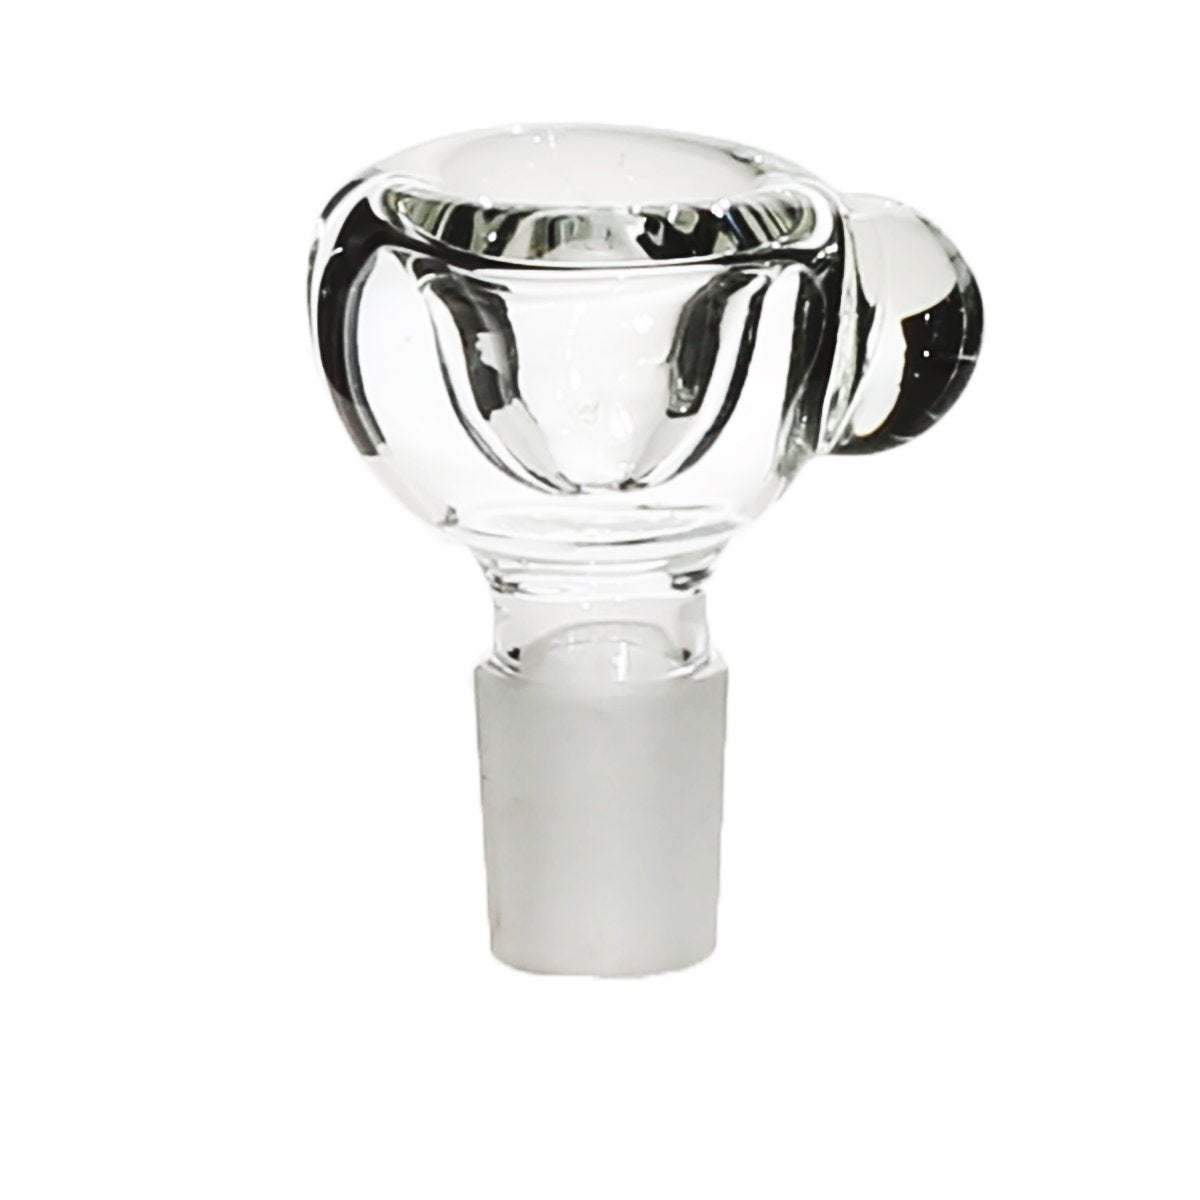 19Mm Heavy Bowl - Clear Accessories